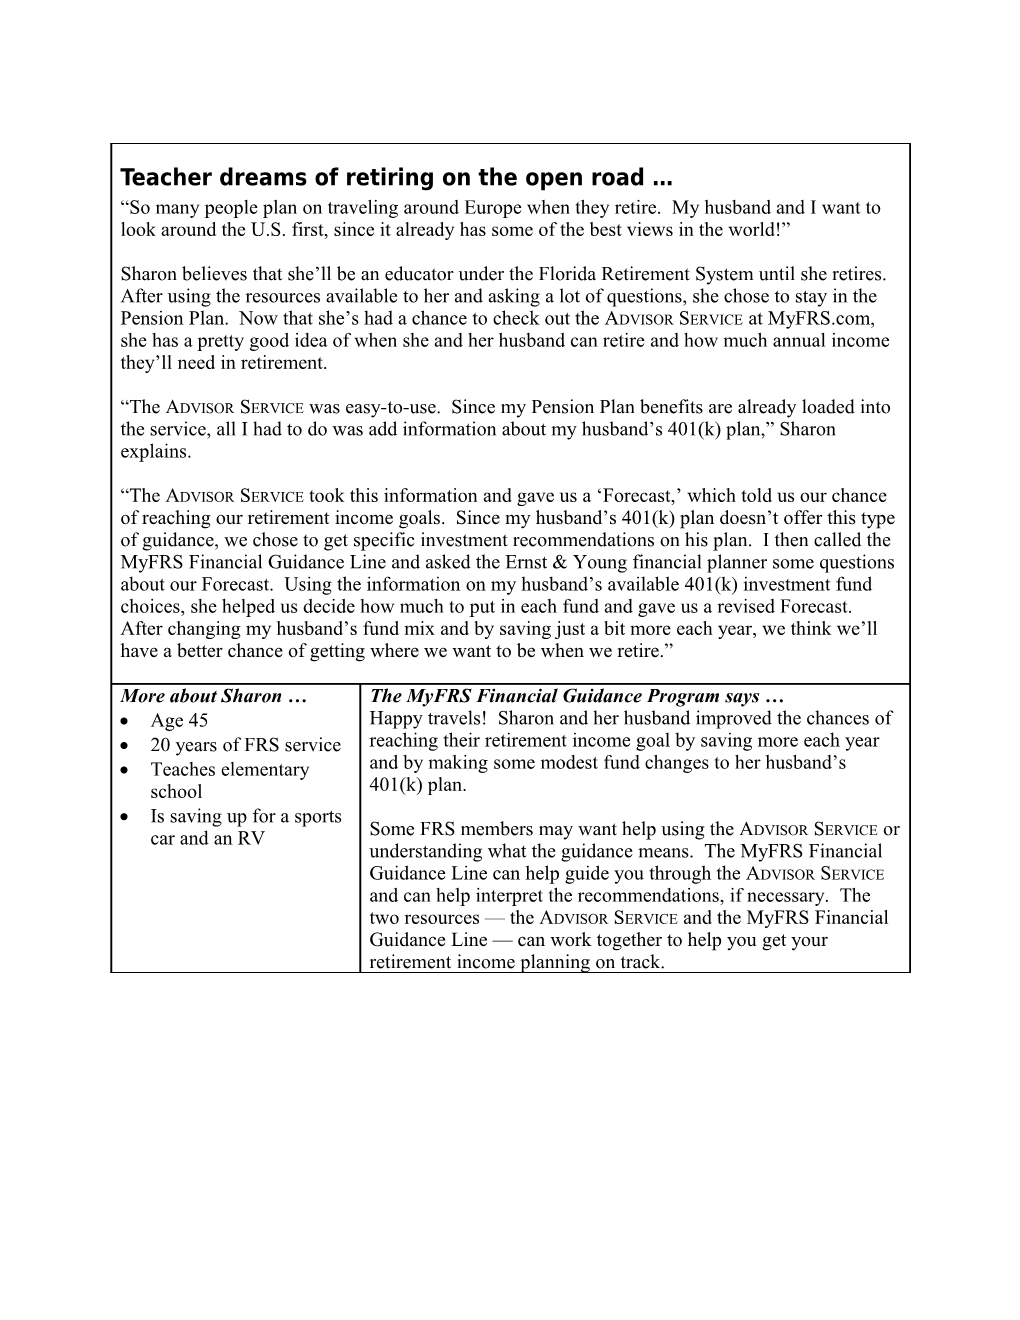 Stylesheet for Page Format: Headings, Subheadings, Bullets, Etc